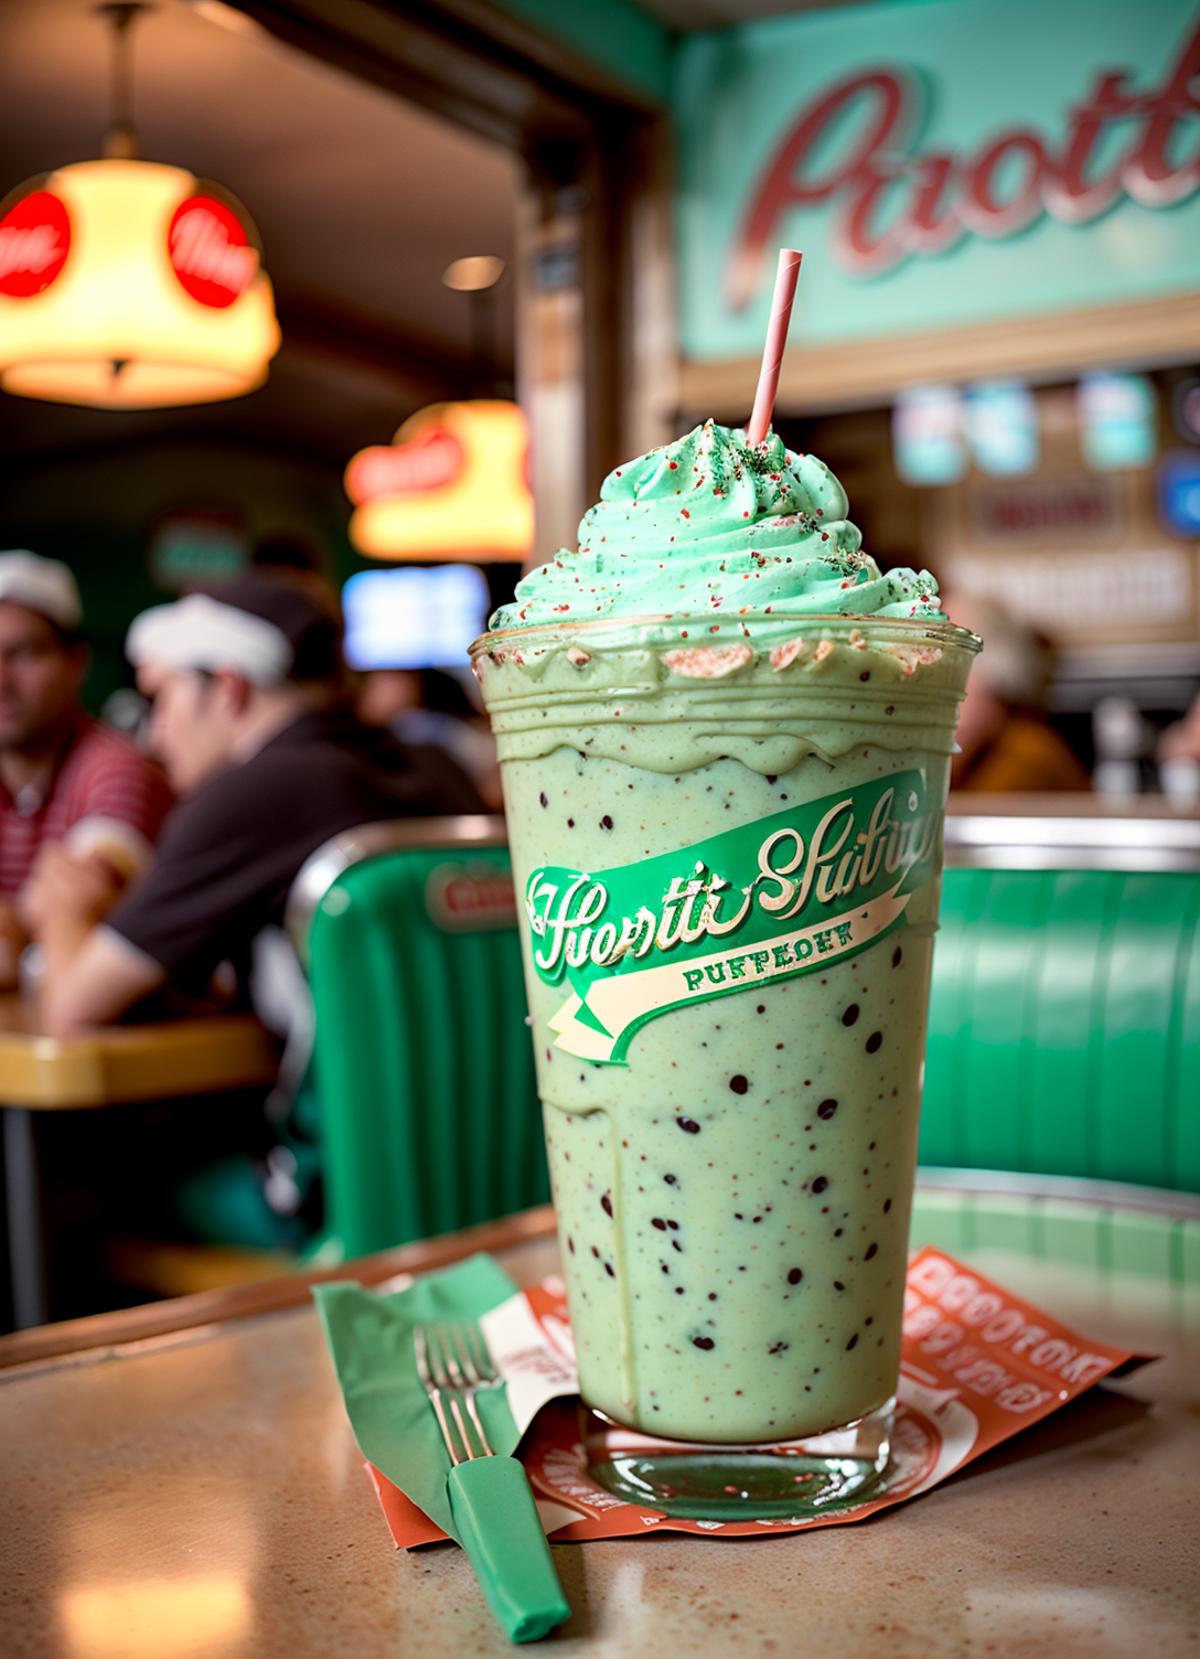 A neon green and white milkshake with chocolate chips on a table.